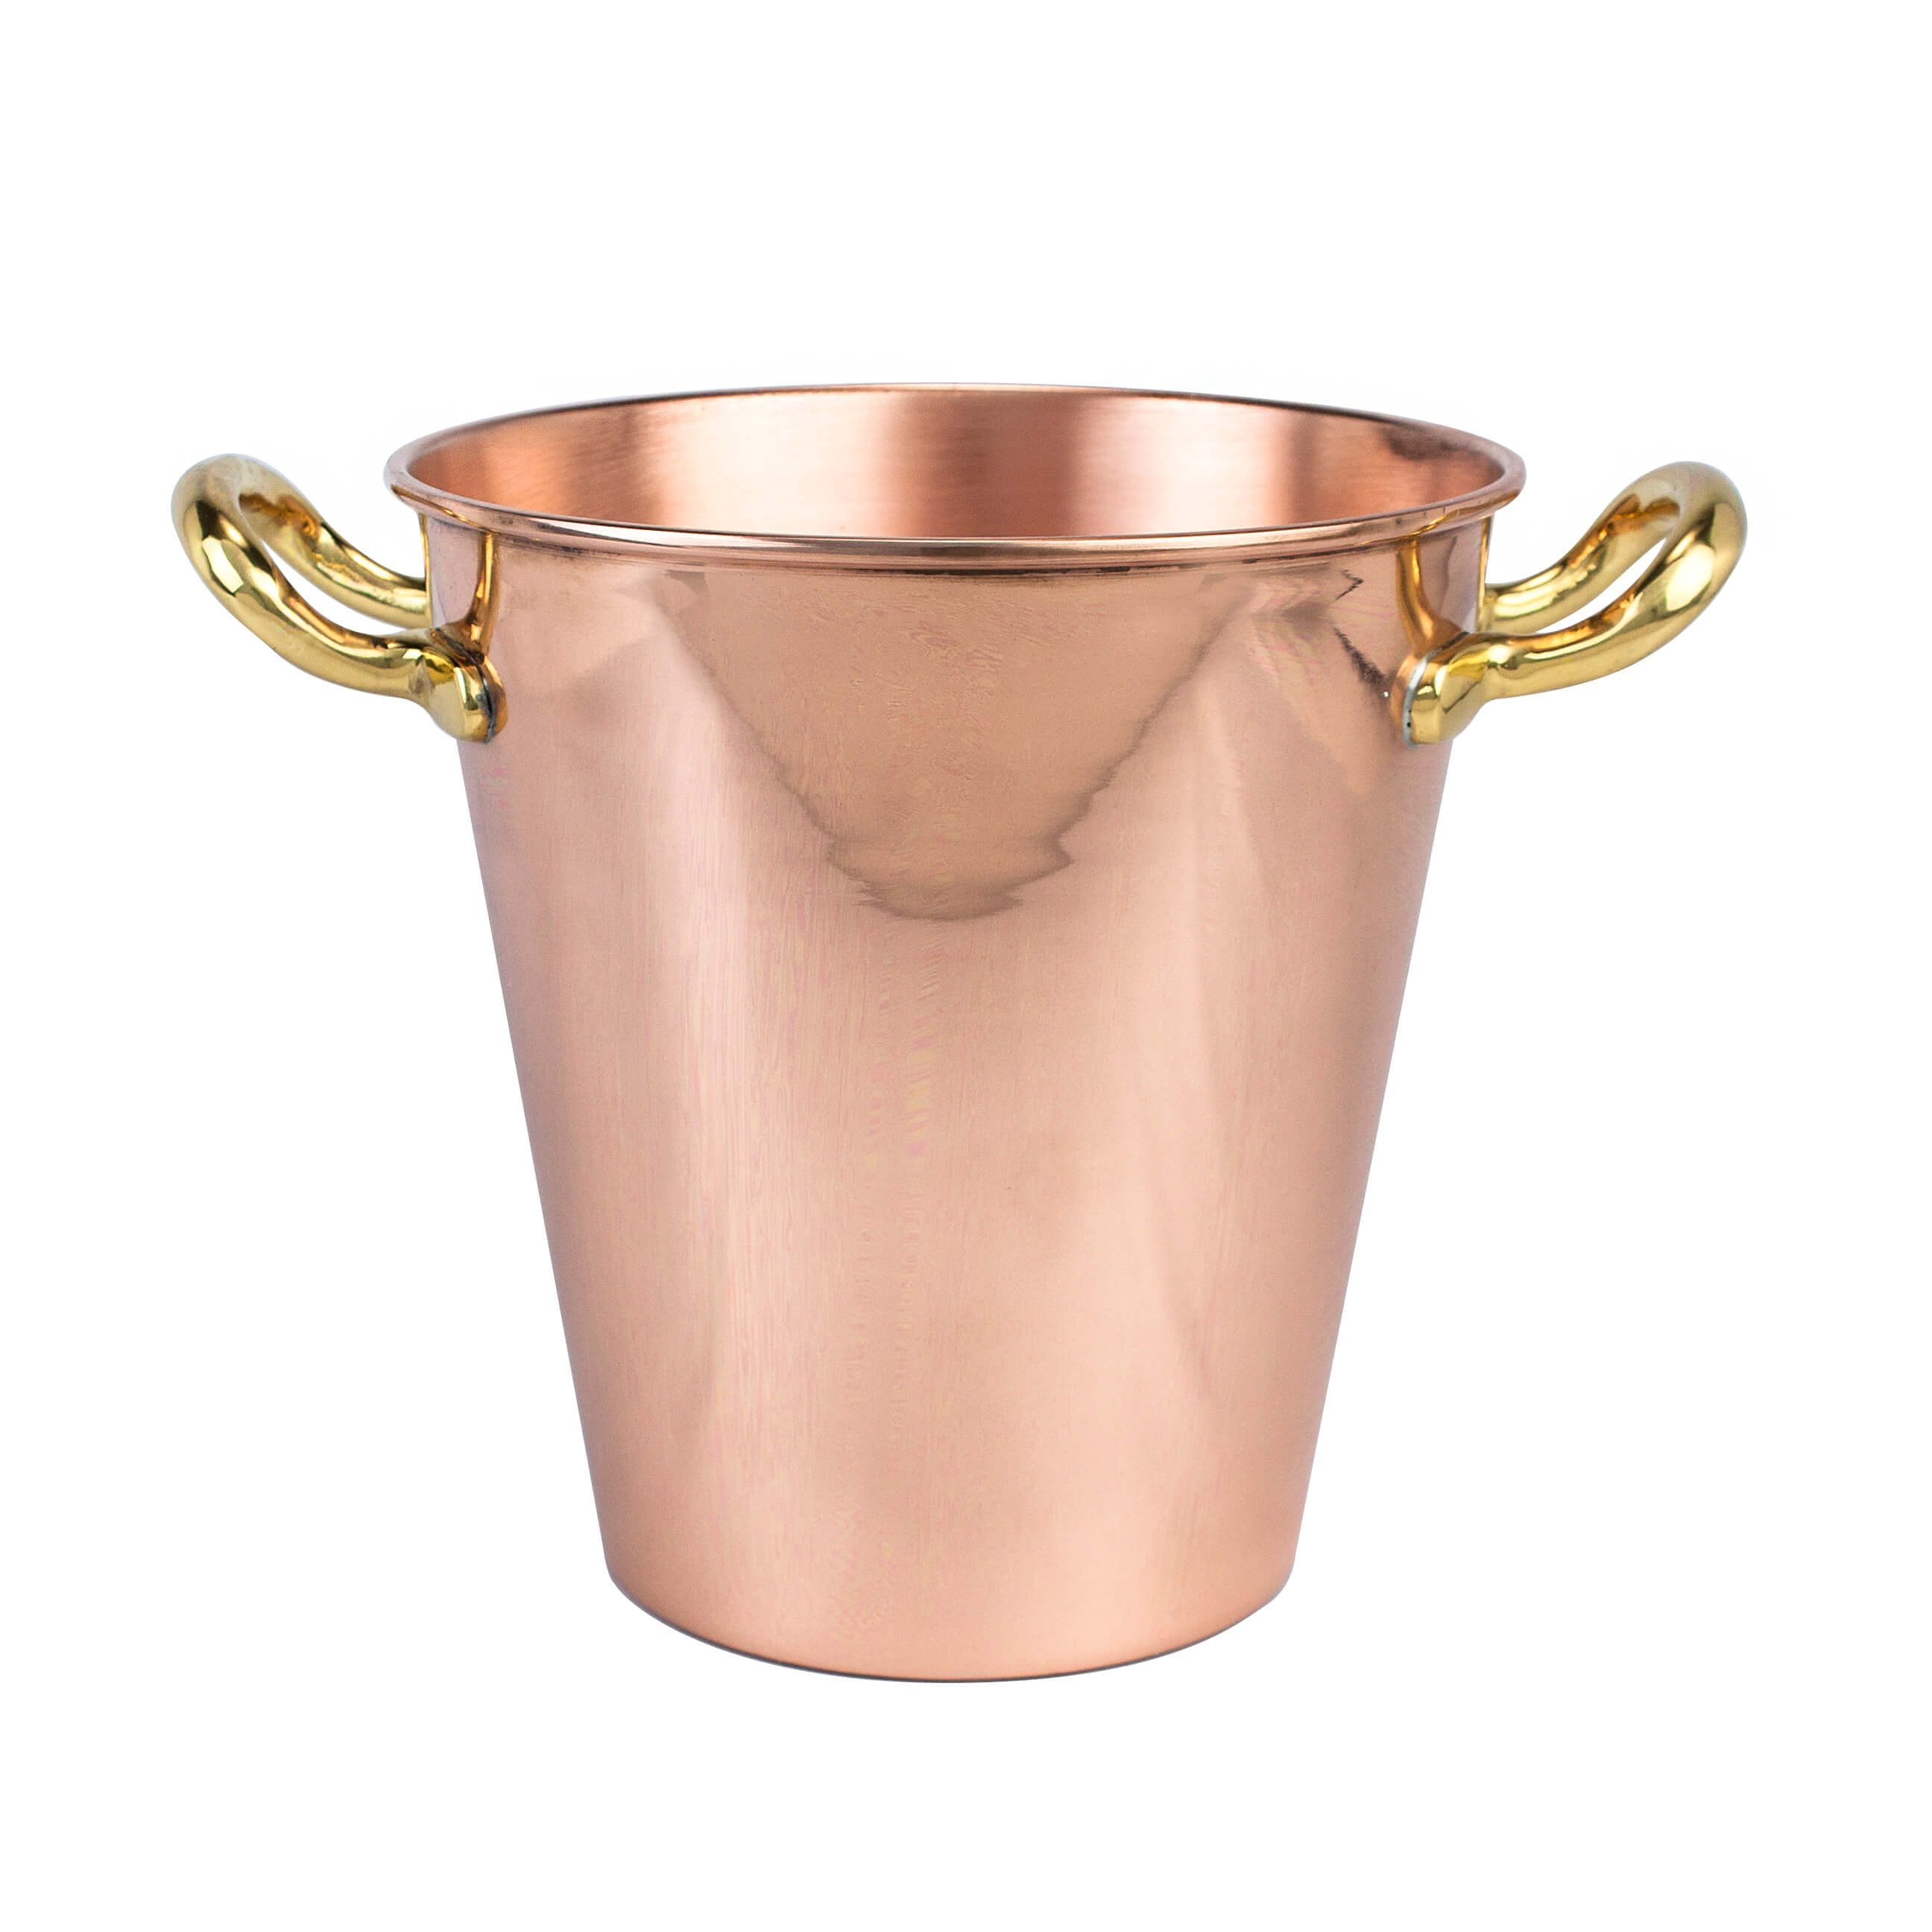 Multi-Colour 20 cm Stainless Steel and Copper Champagne Bucket 